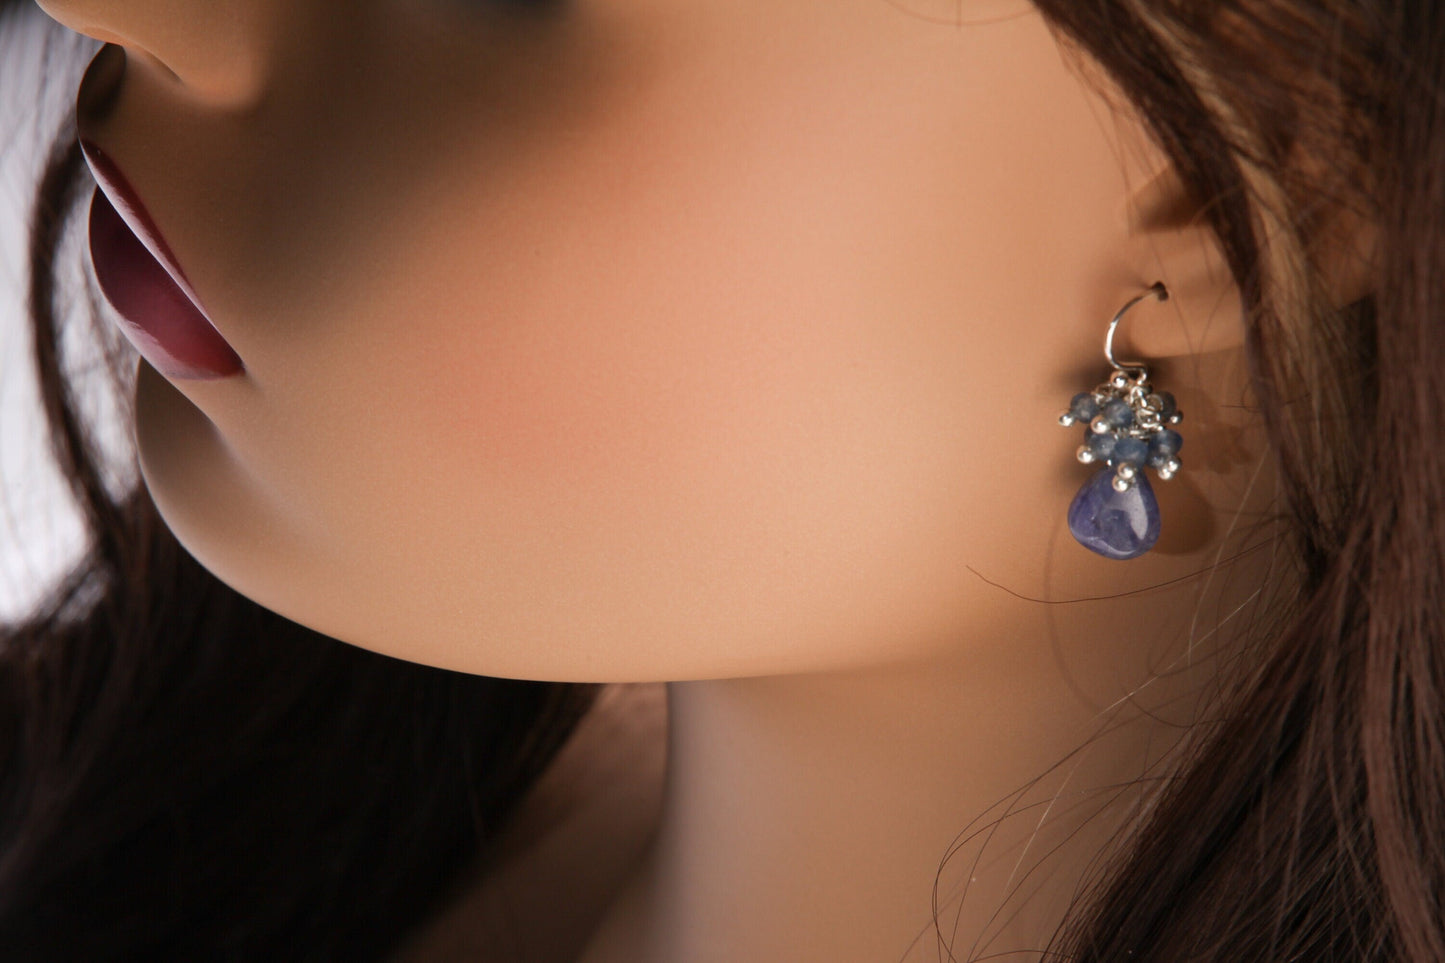 925 Sterling Silver Tanzanite Clusters and Dangling Teardrop Earrings. Optional in Leverback, also available in 14 Gold Filled